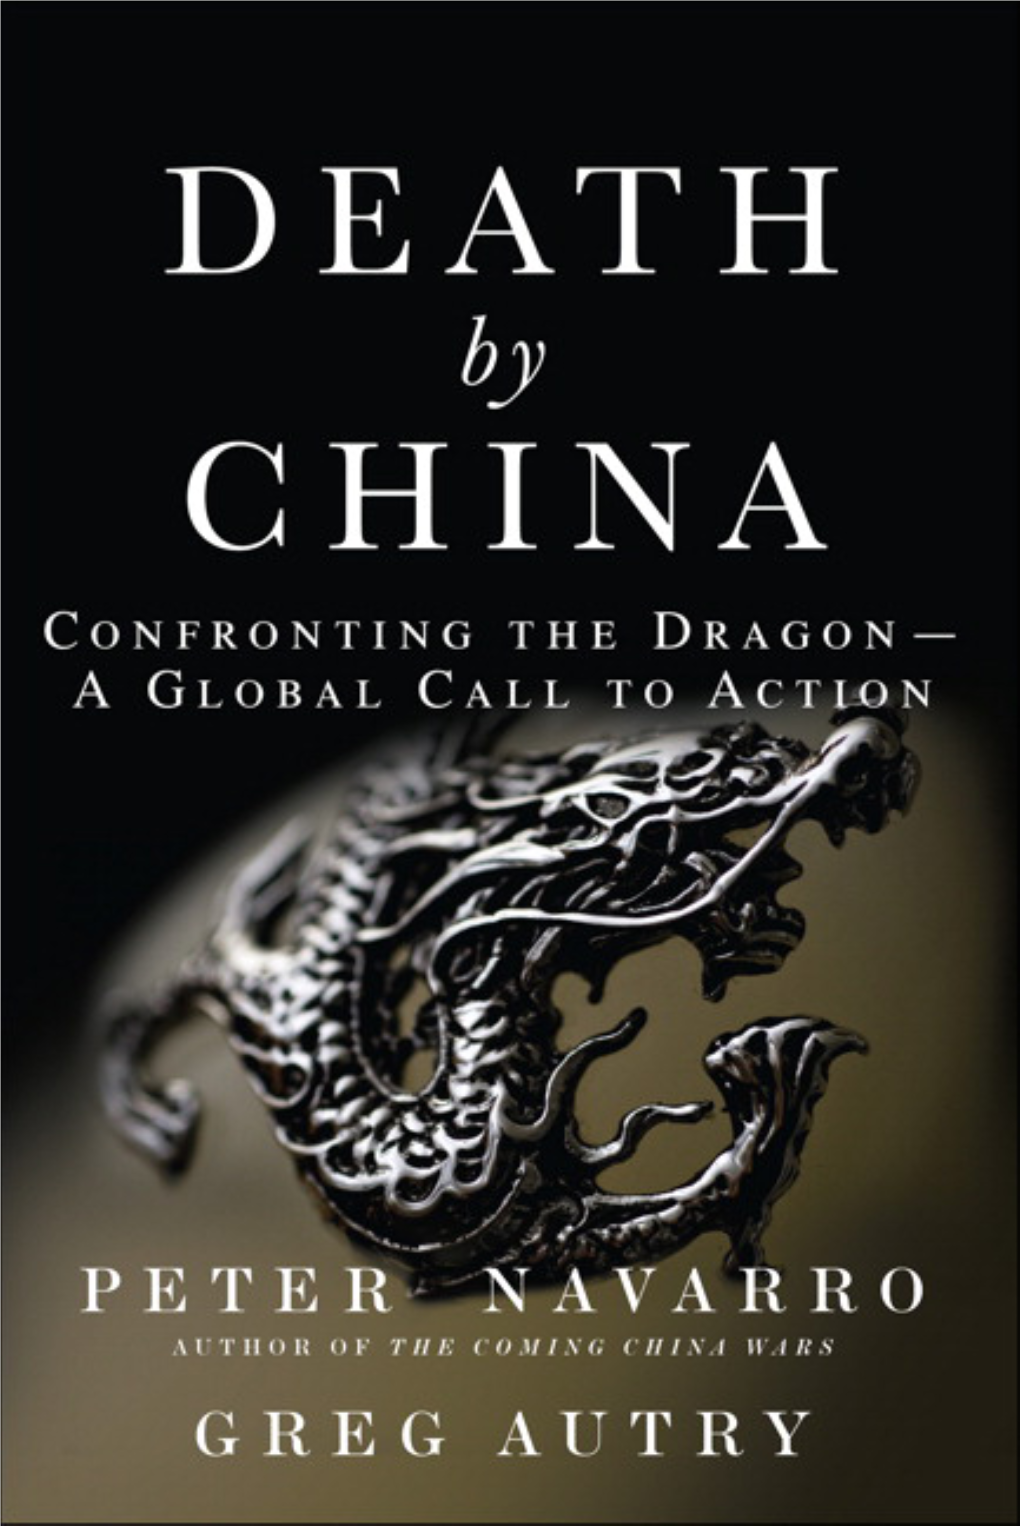 Death by China: Confronting the Dragon—A Global Call to Action